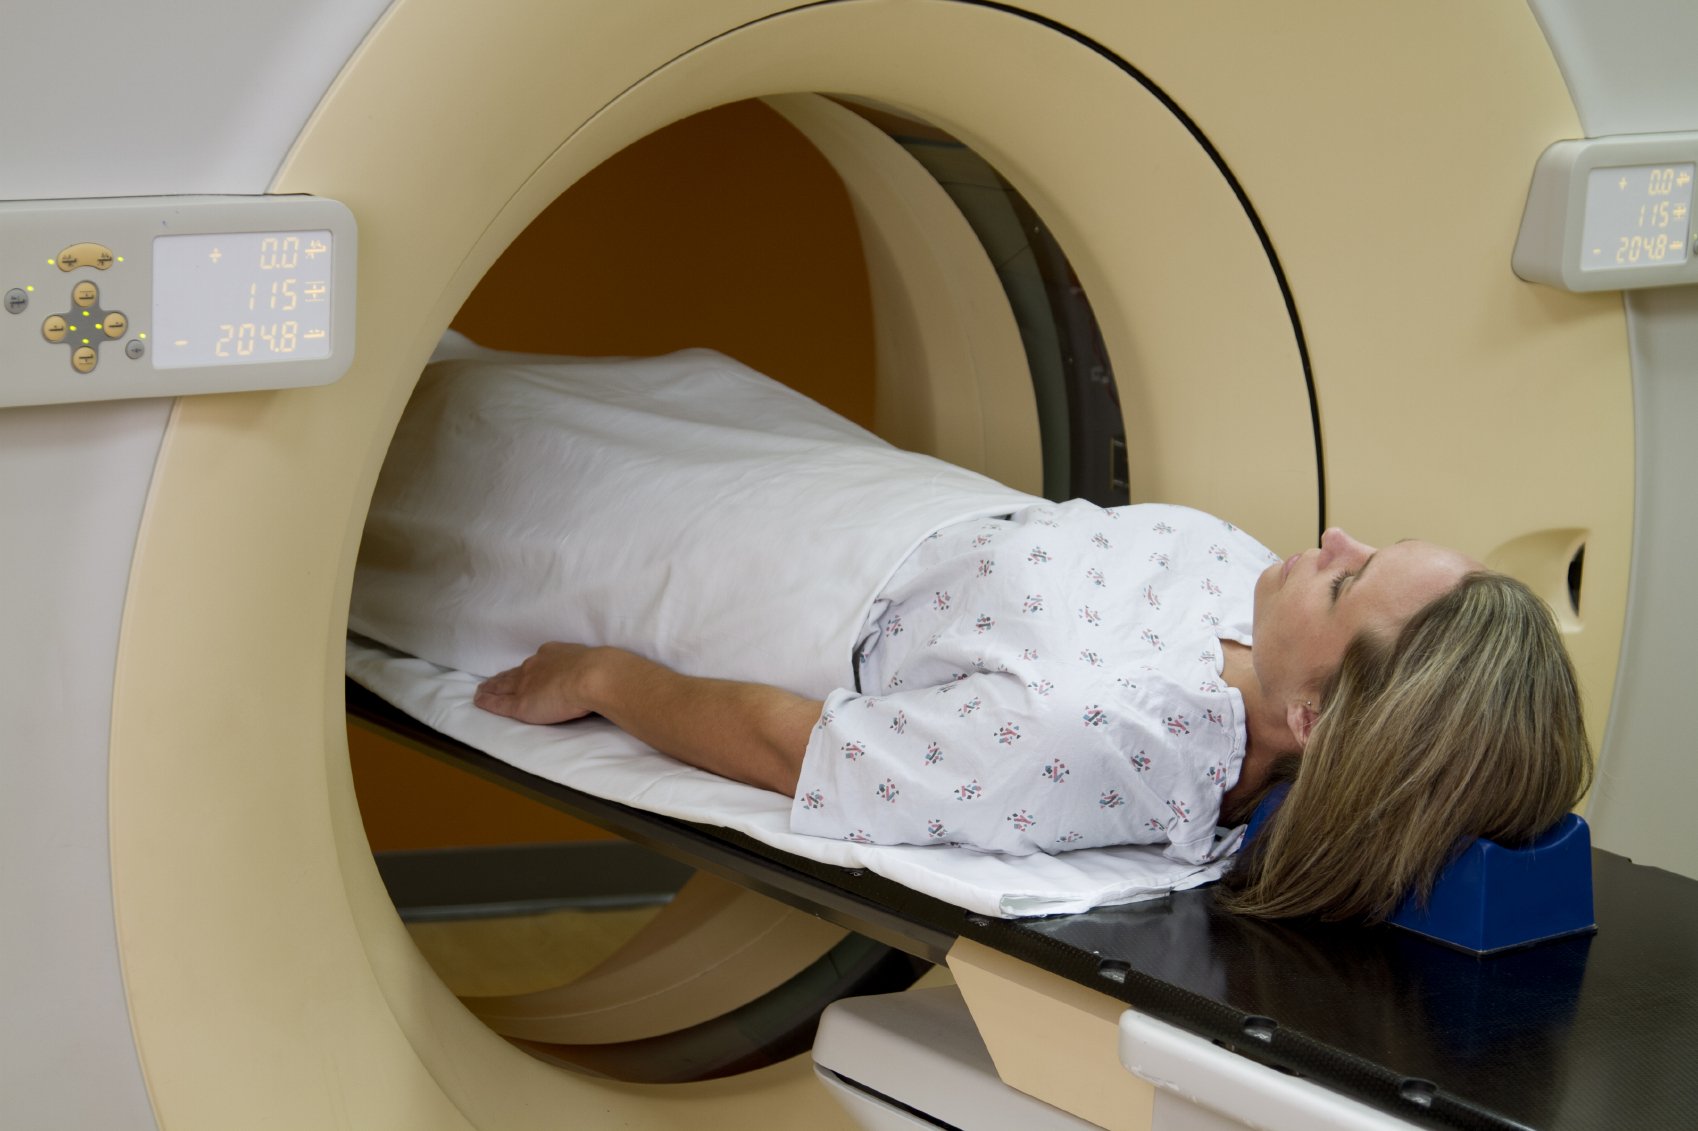 Do you really need that MRI?